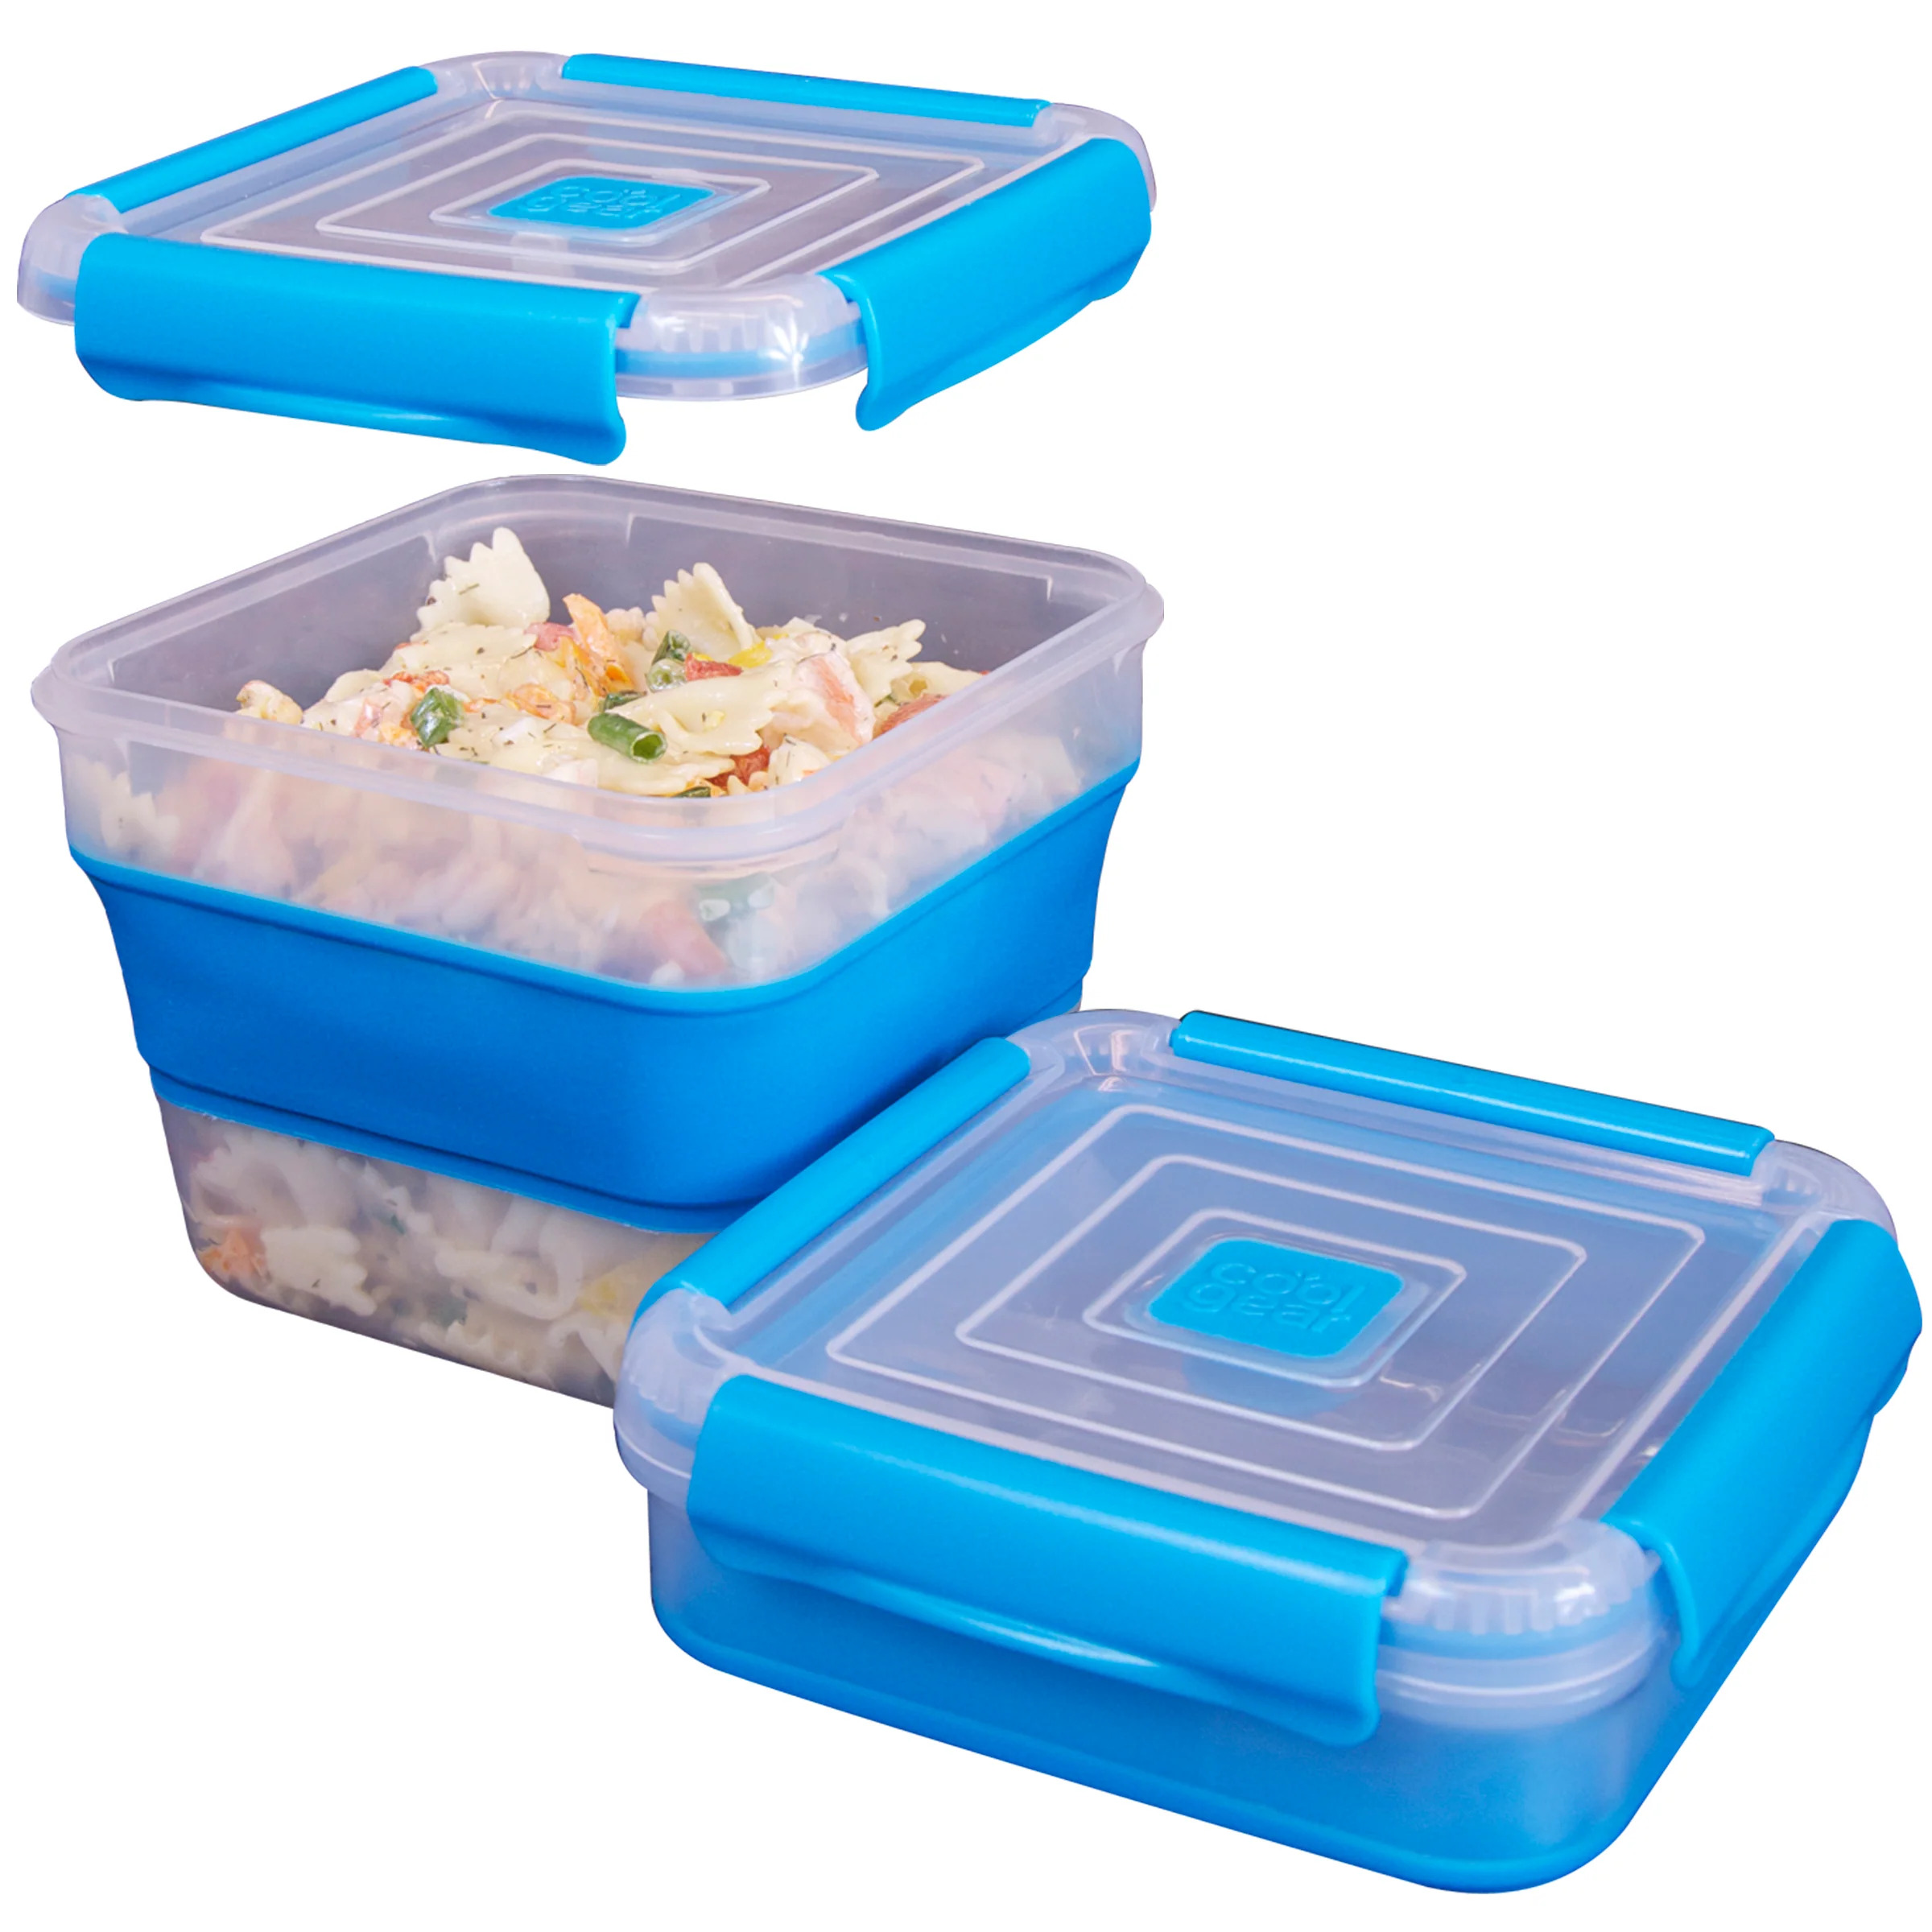 COOL GEAR 3-Pack Collapsible 7.5 Cup Square Food Container | Dishwasher and Microwave Safe | Perfect for On The Go Lunches and Leftovers | Expands to Hold 2x More | Air Tight Snaps Keeps Food Fresh - image 5 of 5